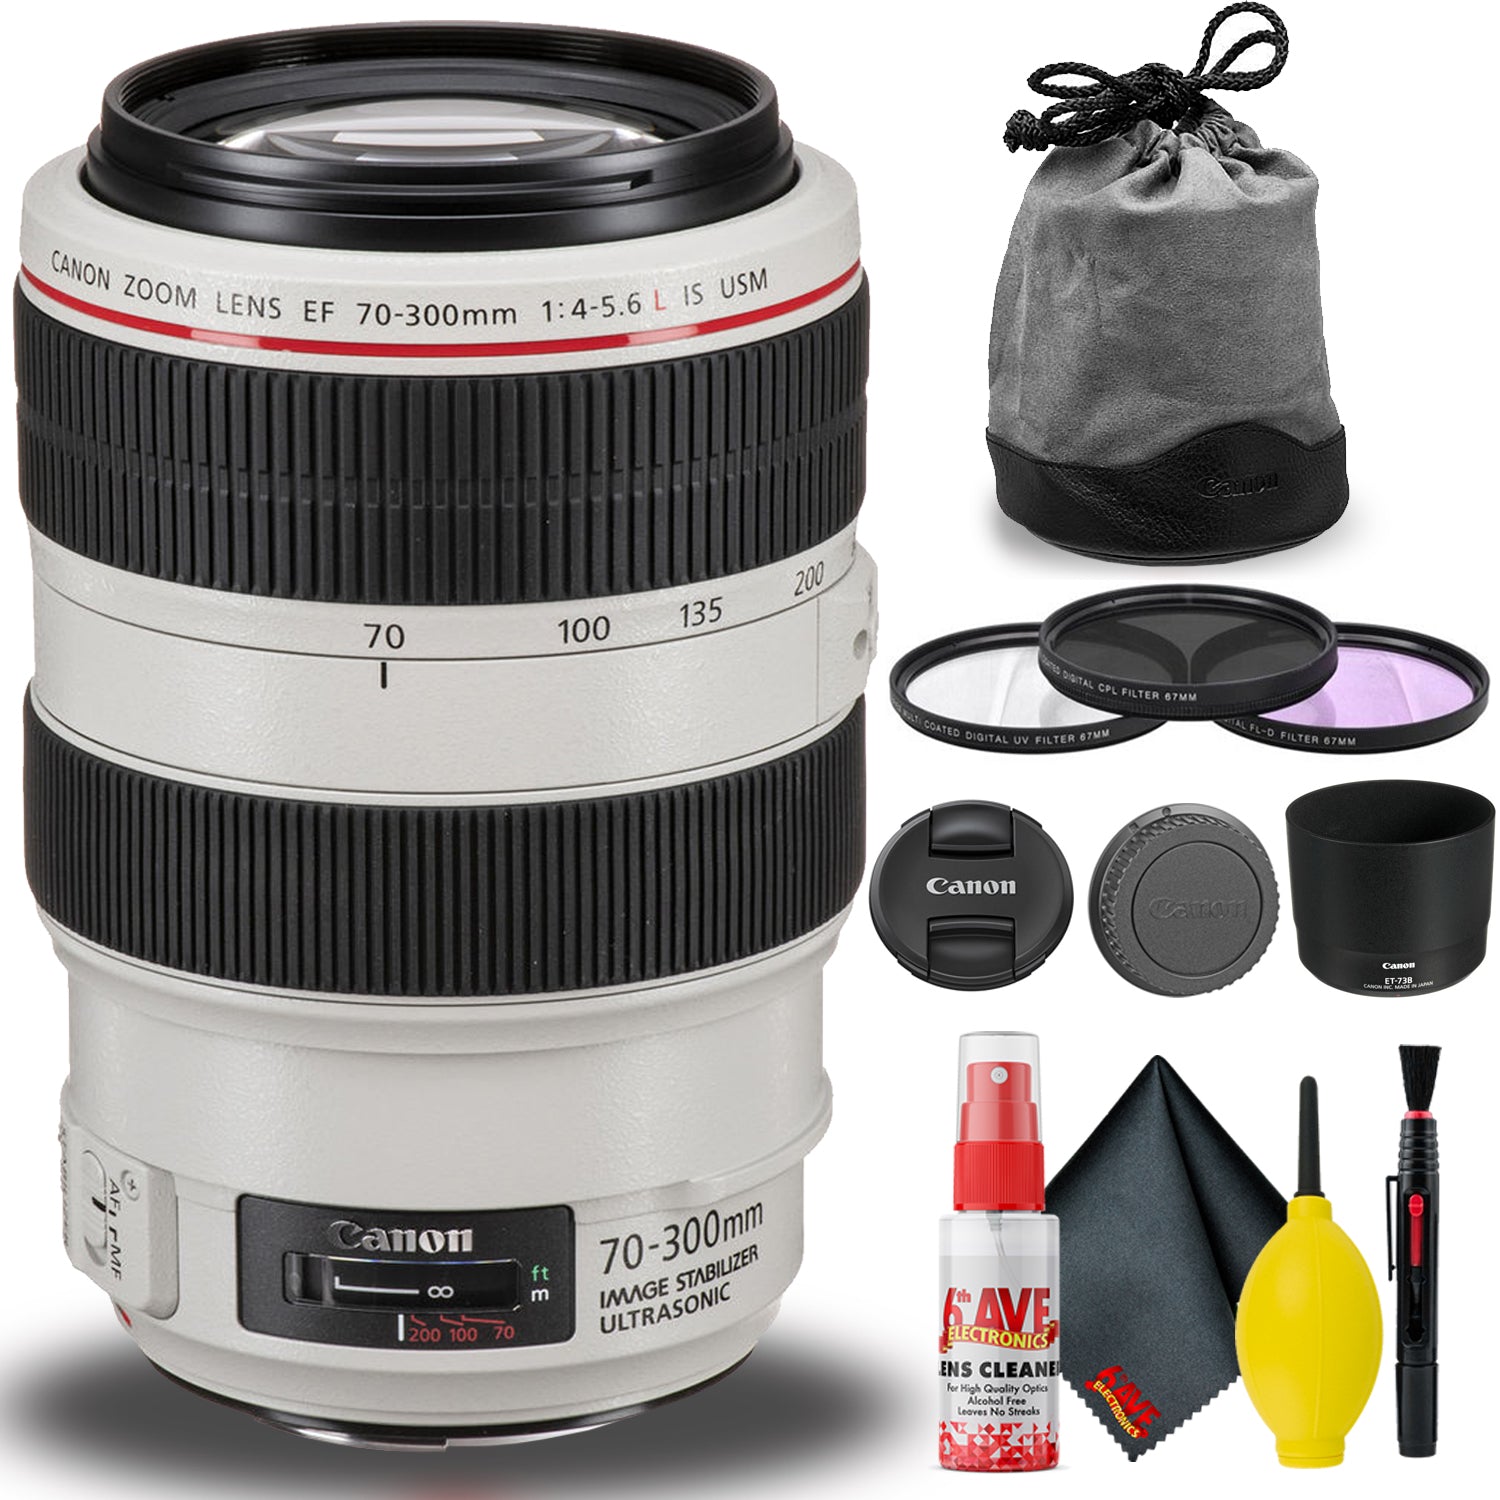 Canon EF 70-300mm f/4-5.6L IS USM Lens Includes Cleaning Kit and Filter Set